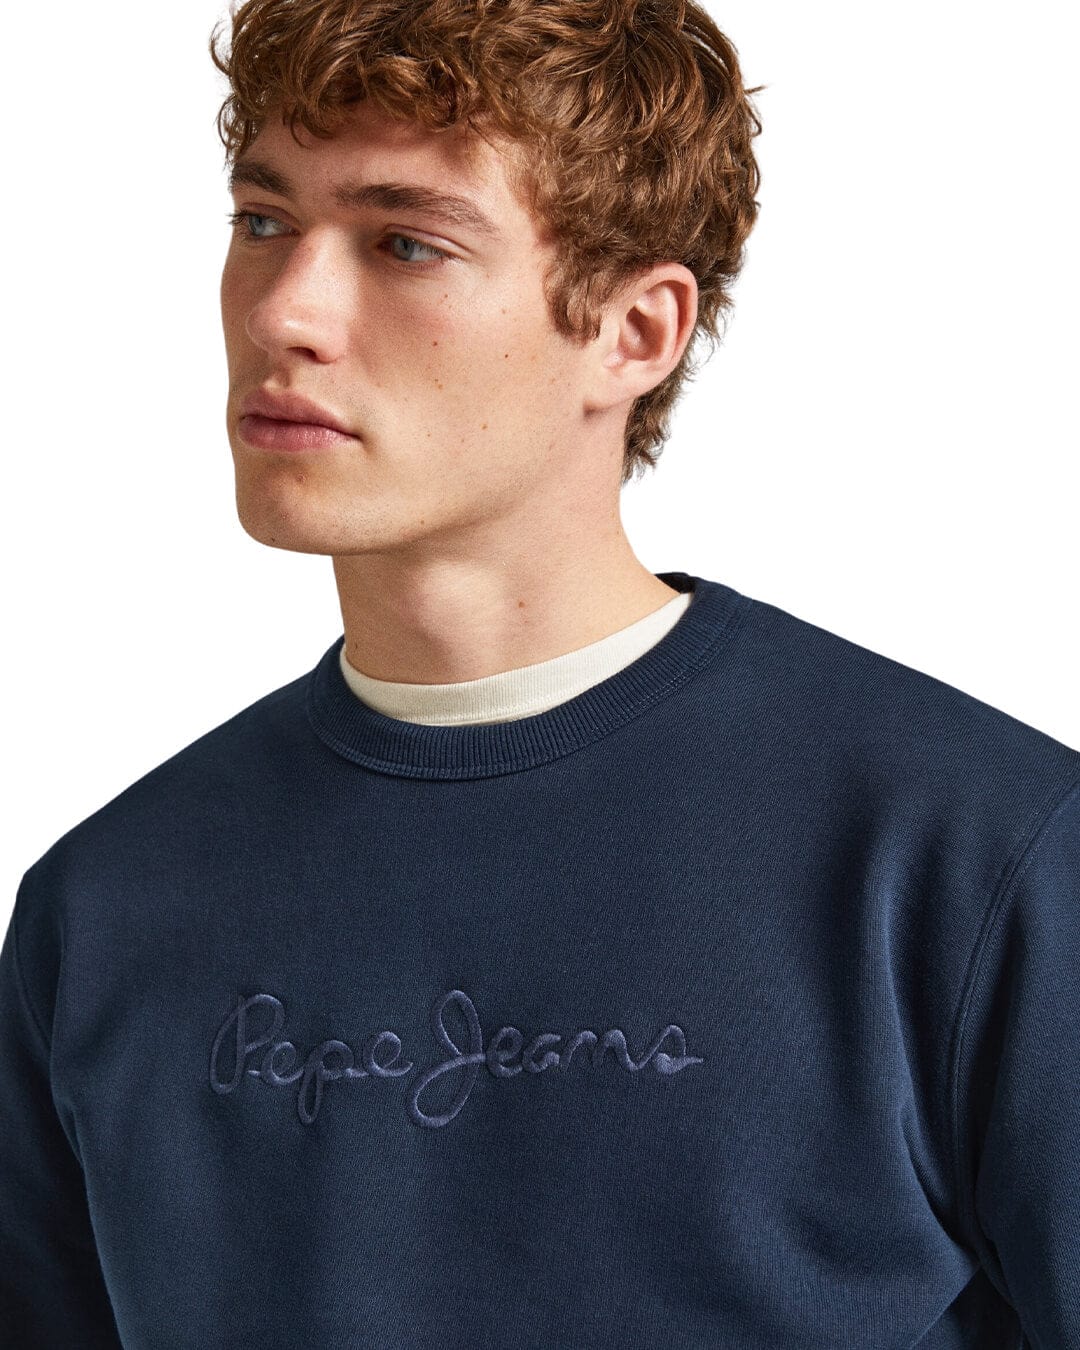 Pepe Jeans Jumpers Pepe Jeans Blue Crewneck Sweatshirt With Logo